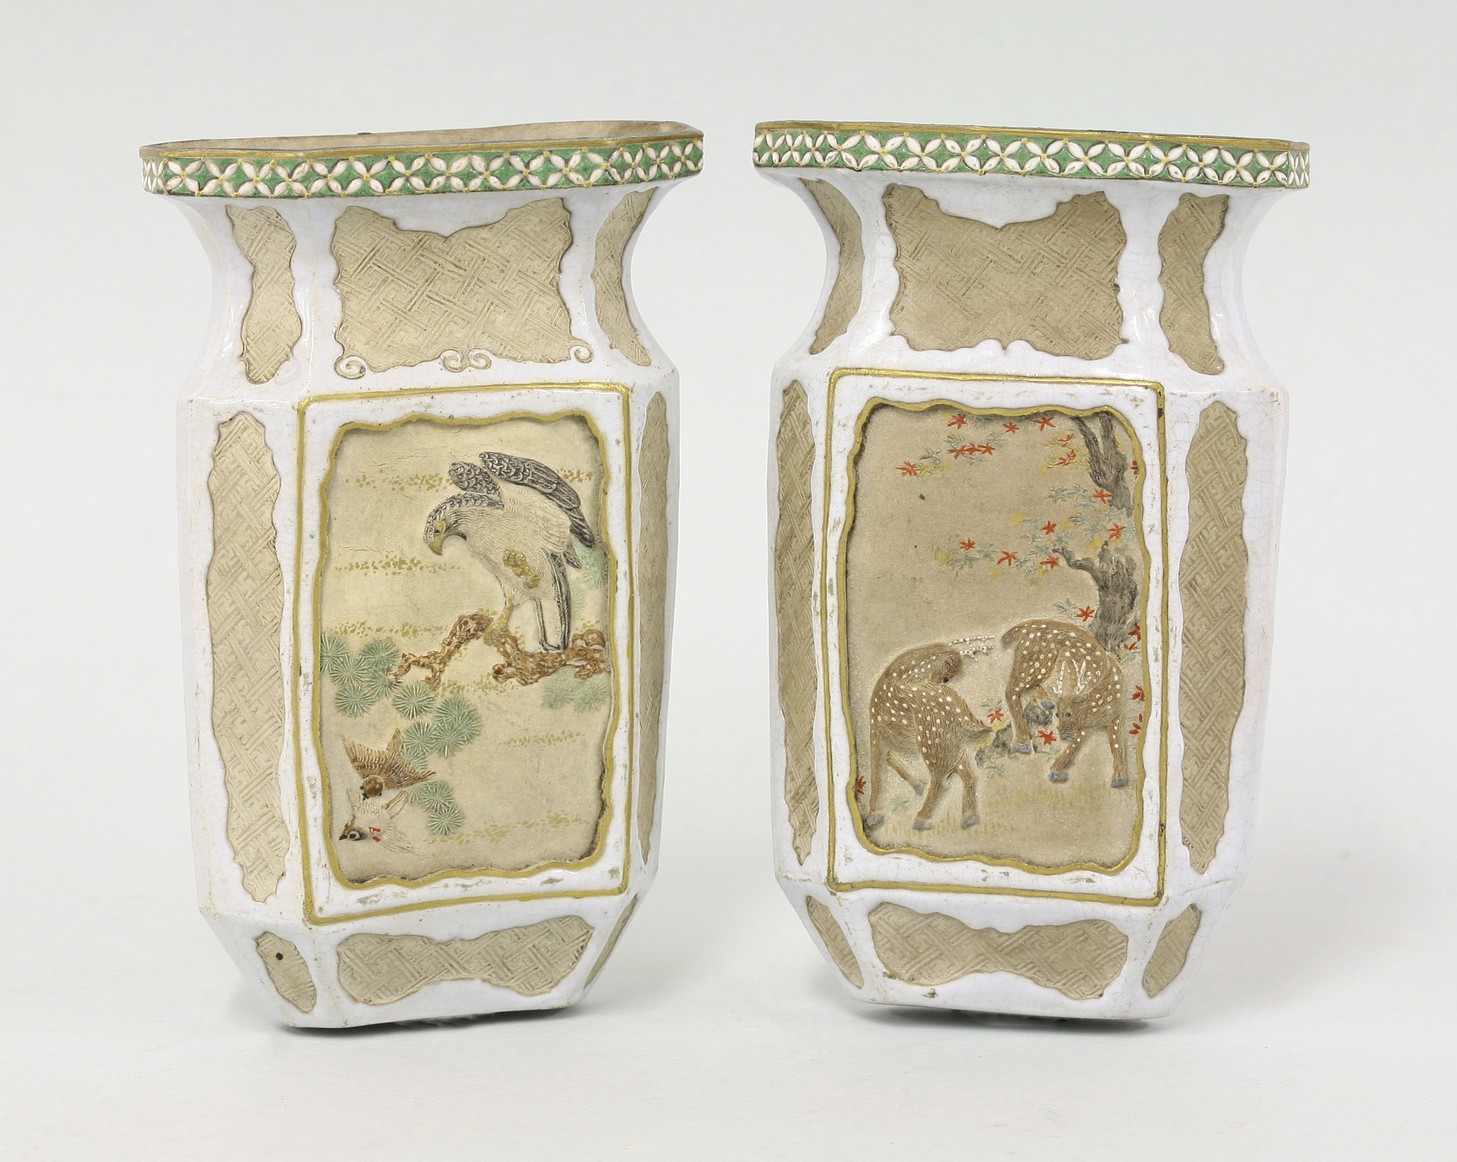 An unusual pair of Banko ware Wall Pockets,
late 19th century, each moulded with deer or eagle,